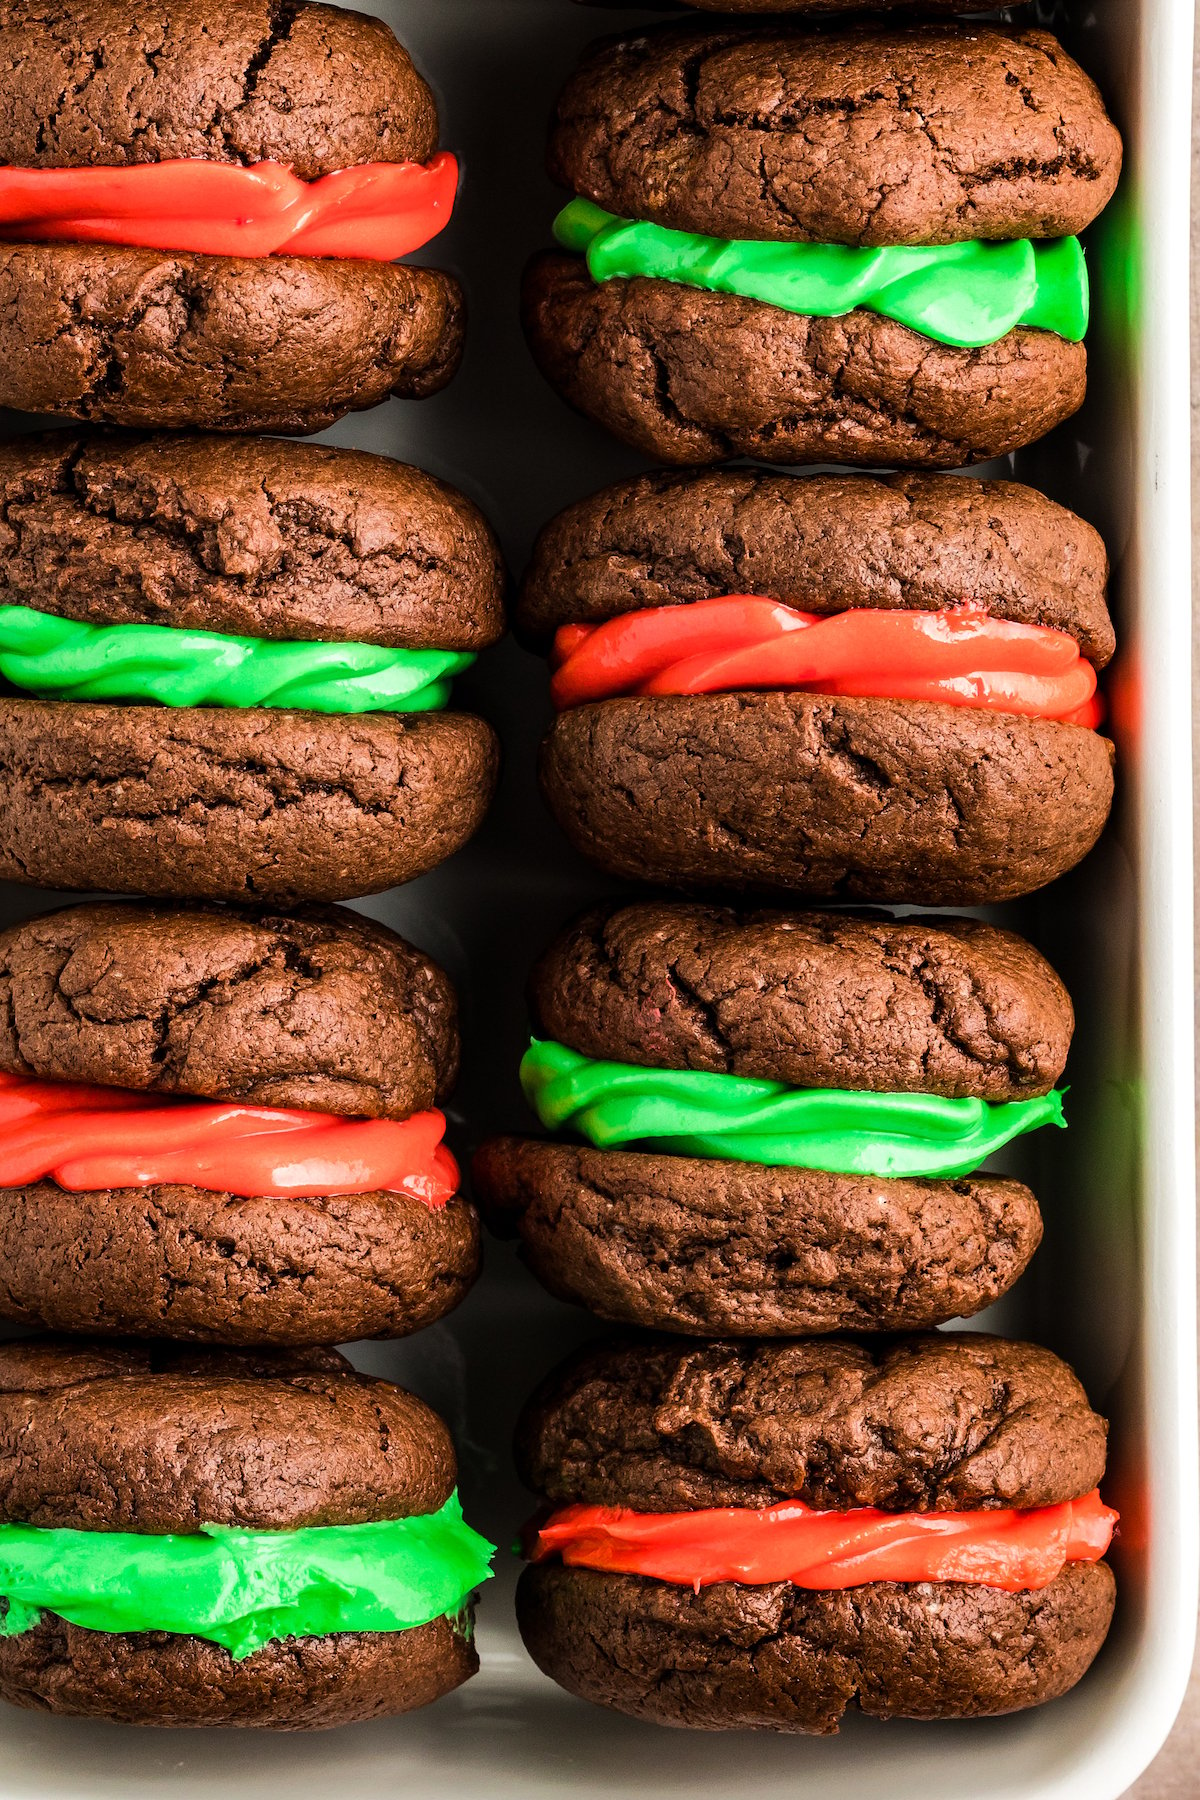 Chocolate whoopie pies sandwiched together with red frosting and green frosting.